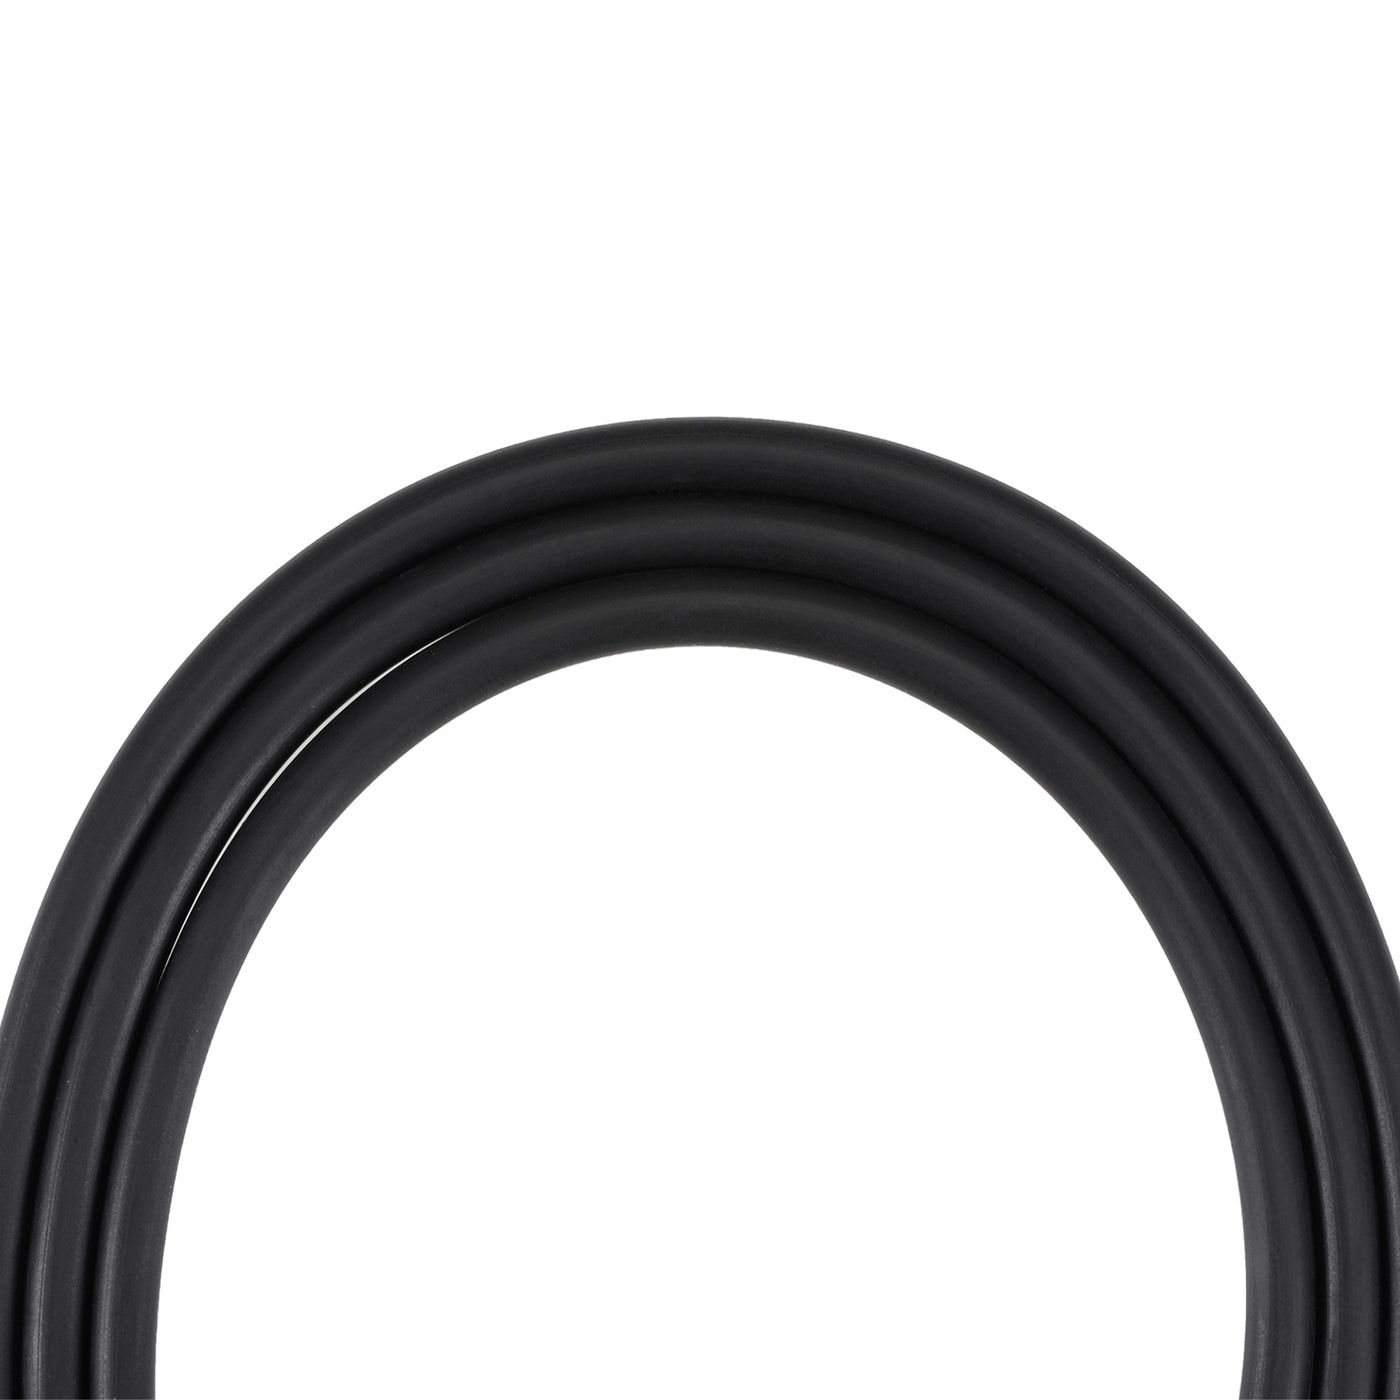 Uxcell Uxcell Fuel Line Hose 19mm ID 25mm OD 3.3ft Oil Line Fuel Pipe Rubber Water Hose Black